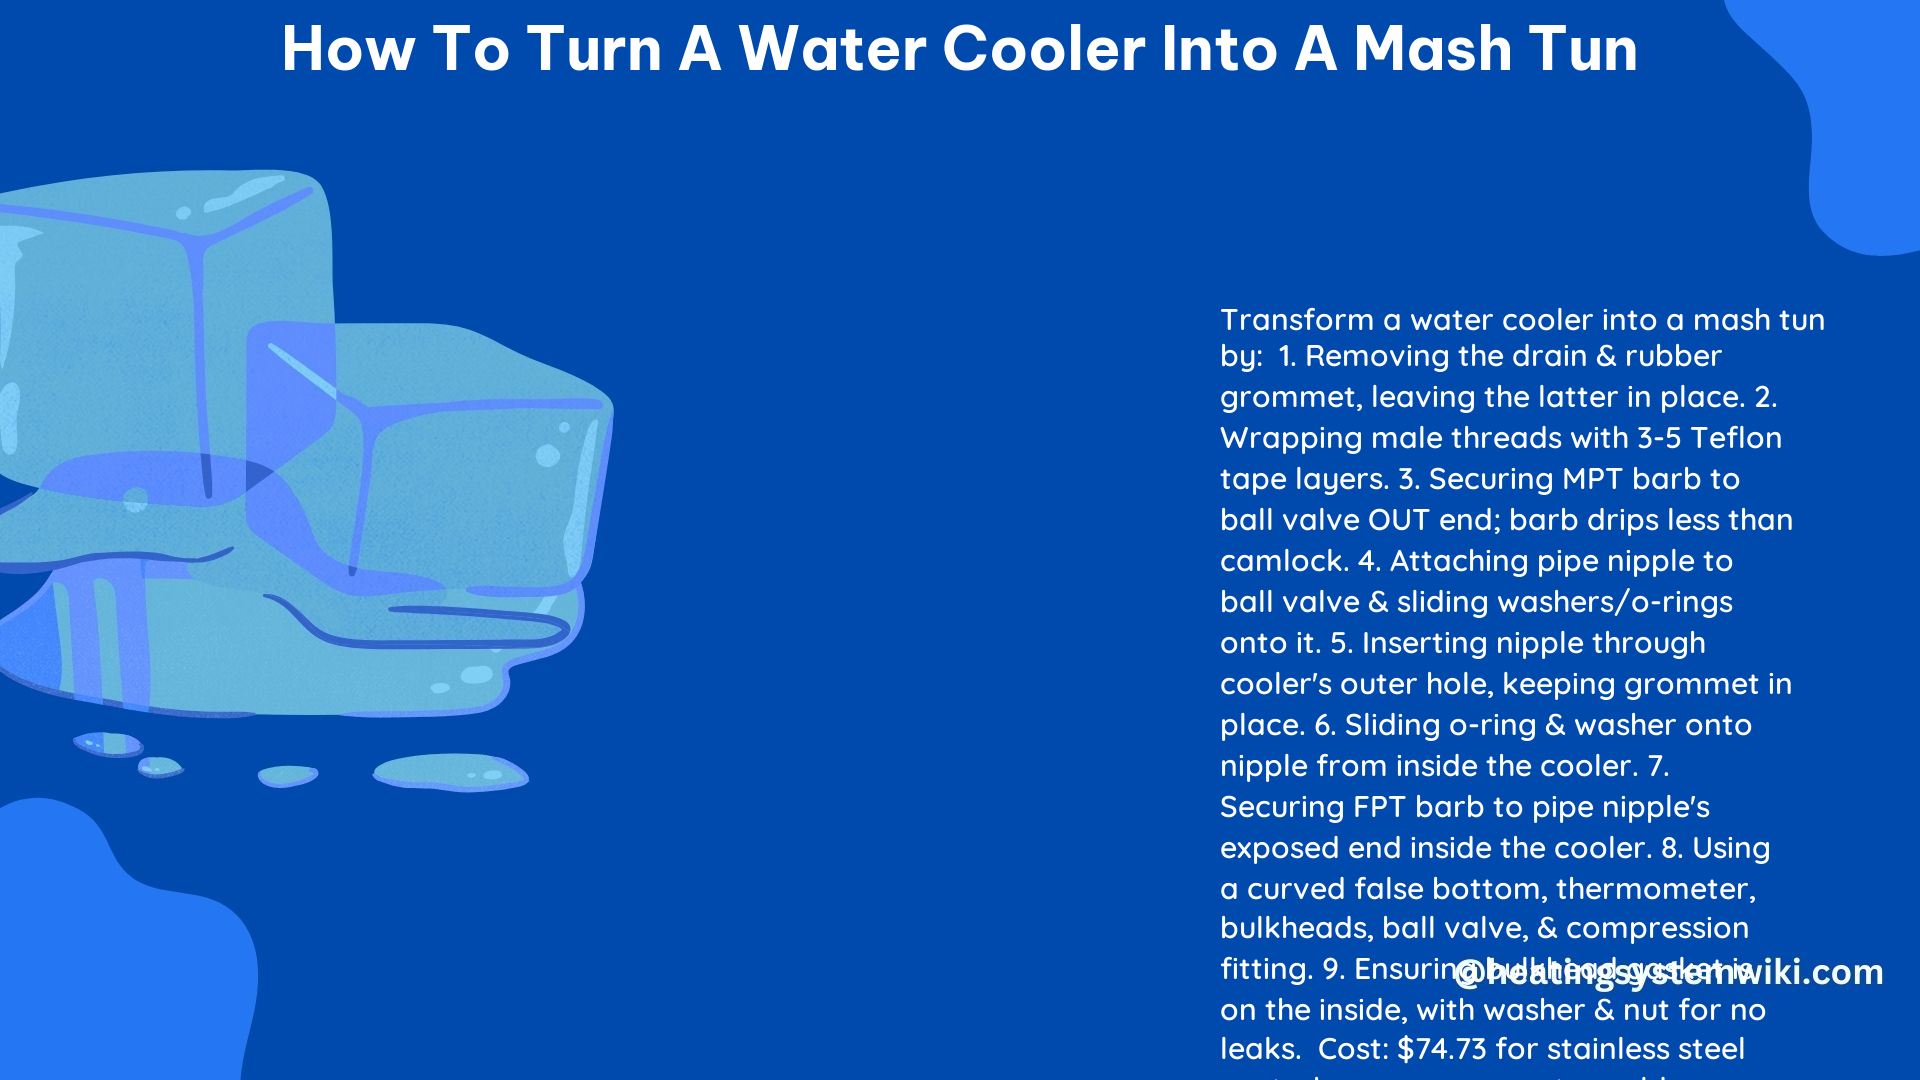 How to Turn a Water Cooler Into a Mash Tun